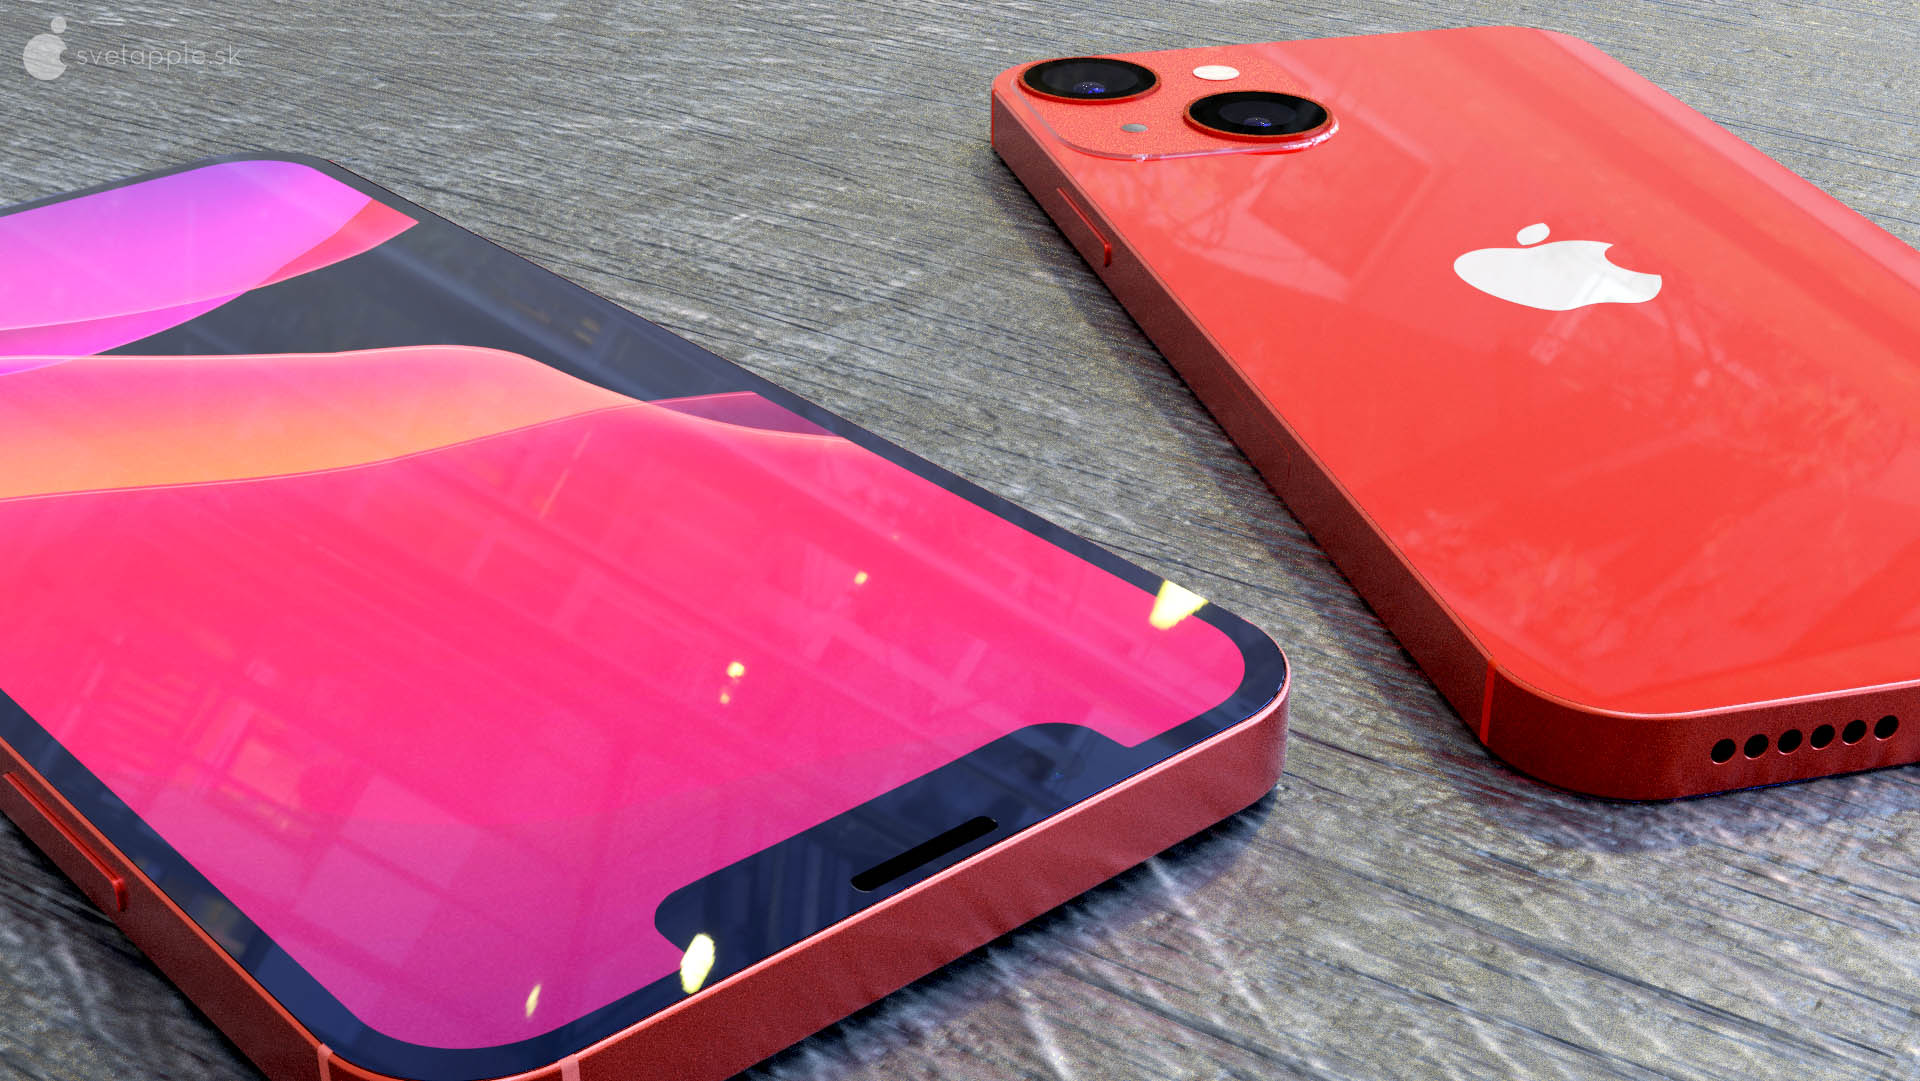 Renders Imagine Iphone 13 Mini With Redesigned Camera Bump Smaller Notch 9to5mac